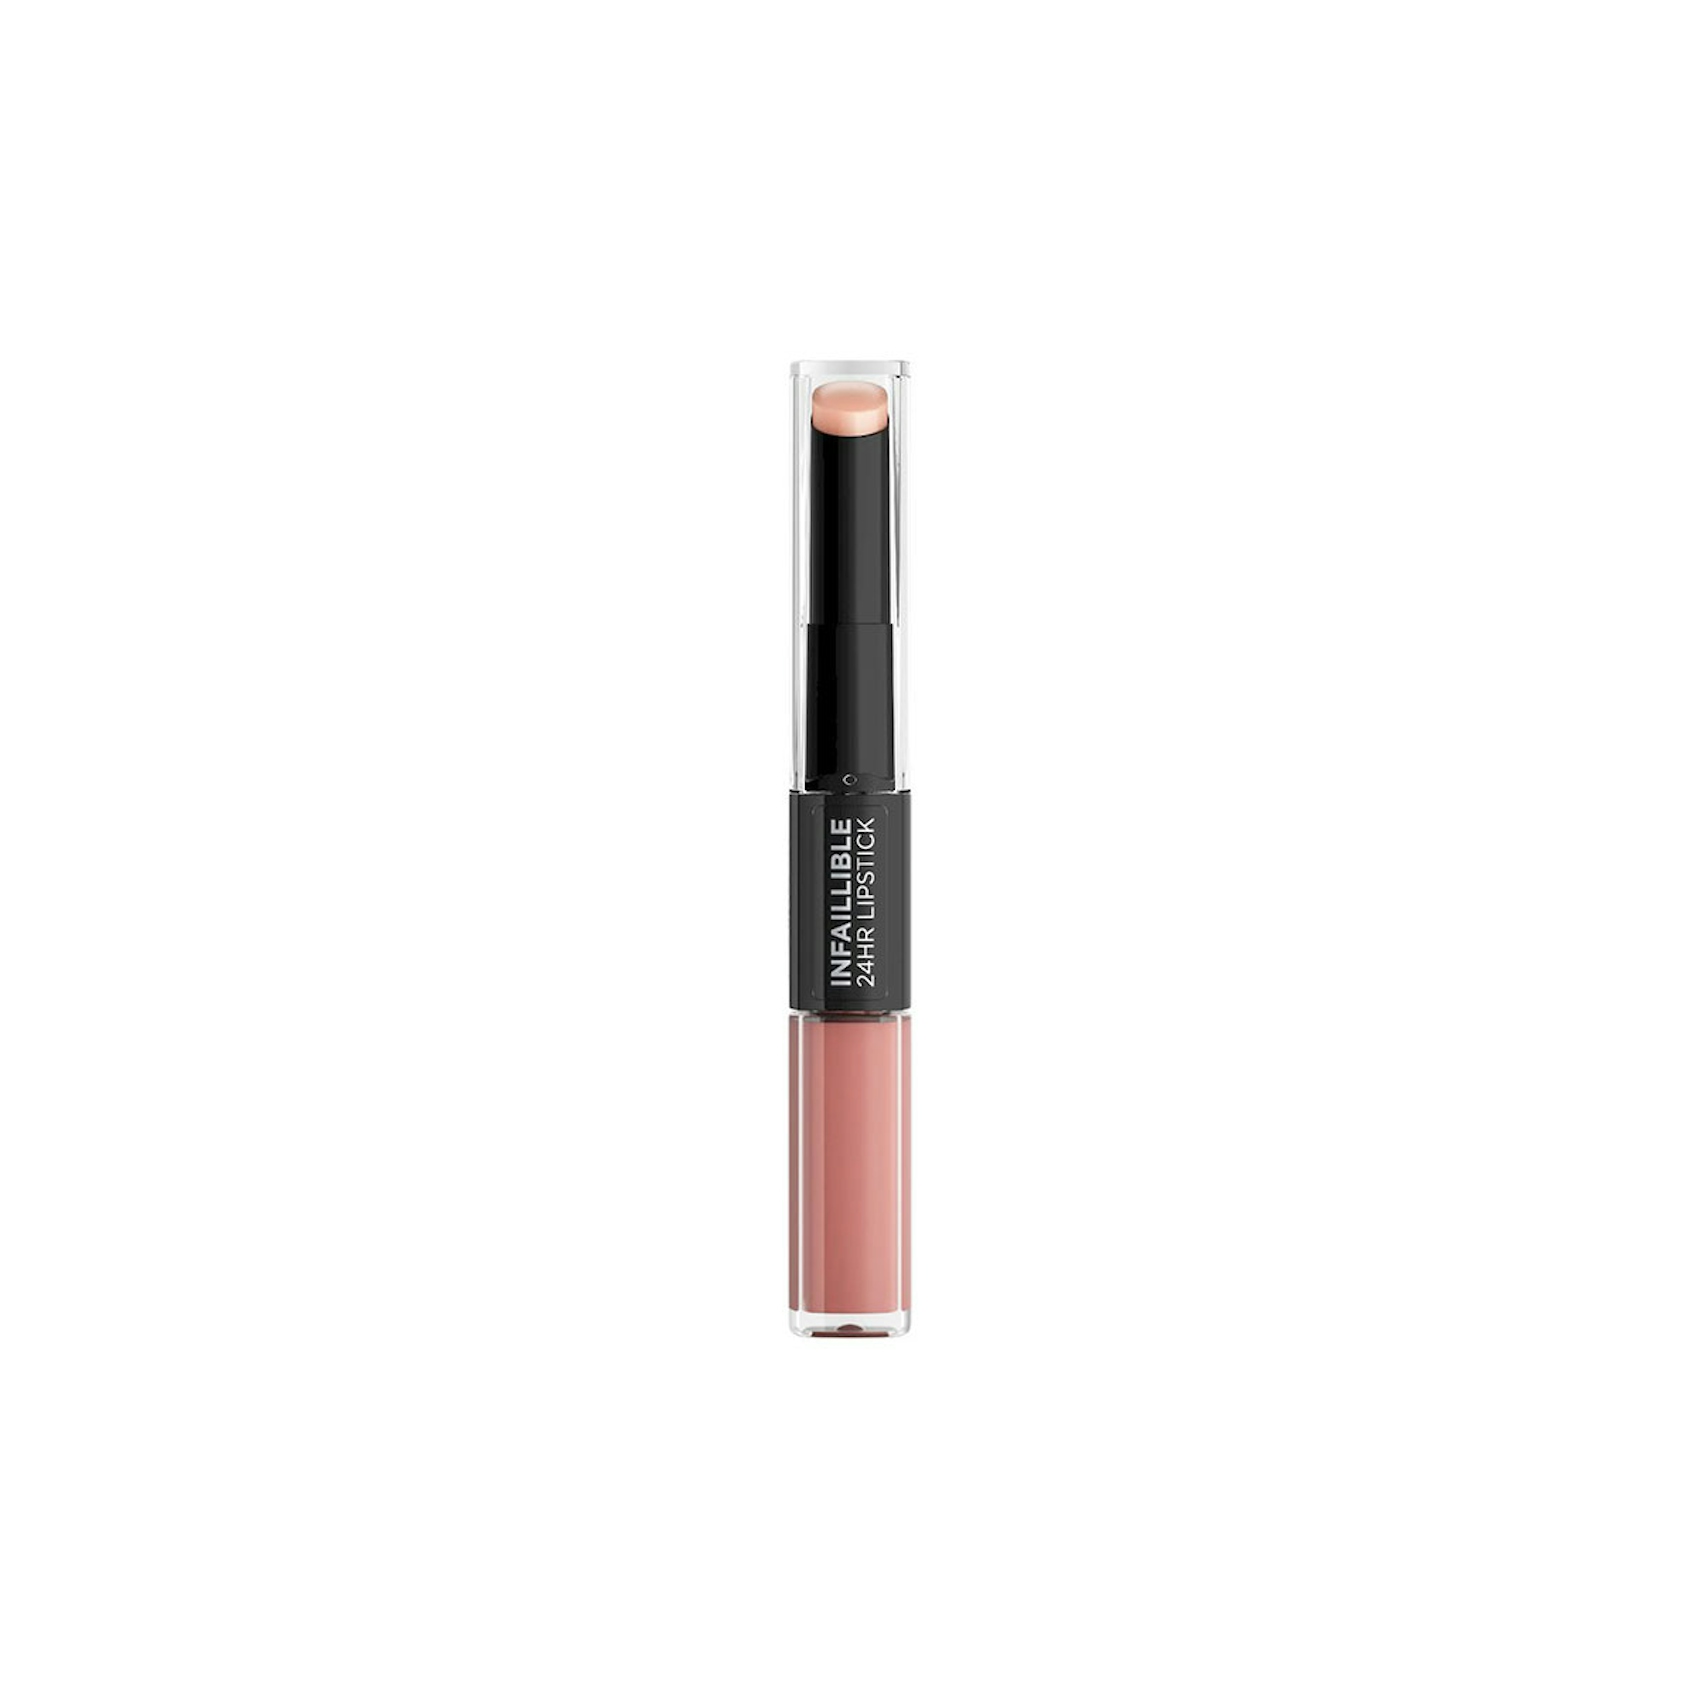 Labial Infaillible 24H Loreal 1 ud